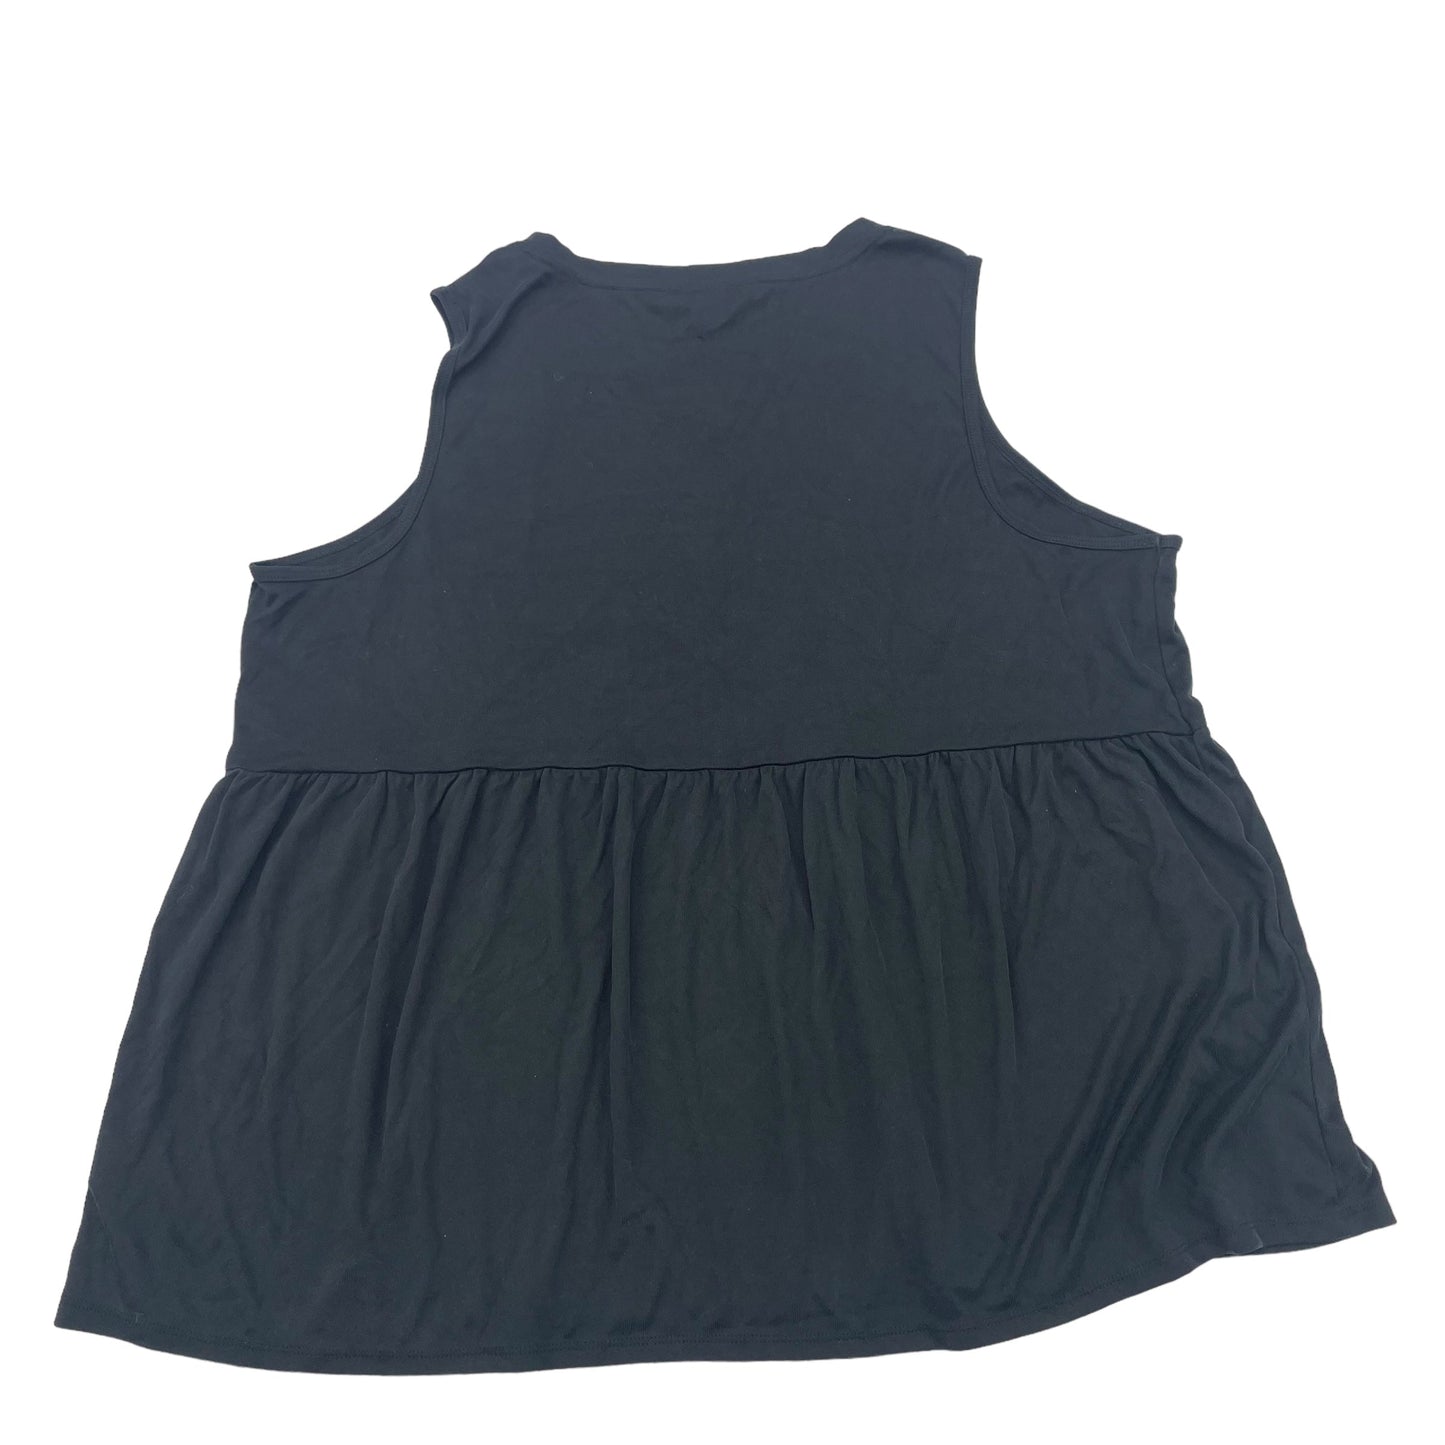 BLACK TIME AND TRU TOP SLEEVELESS, Size 3X